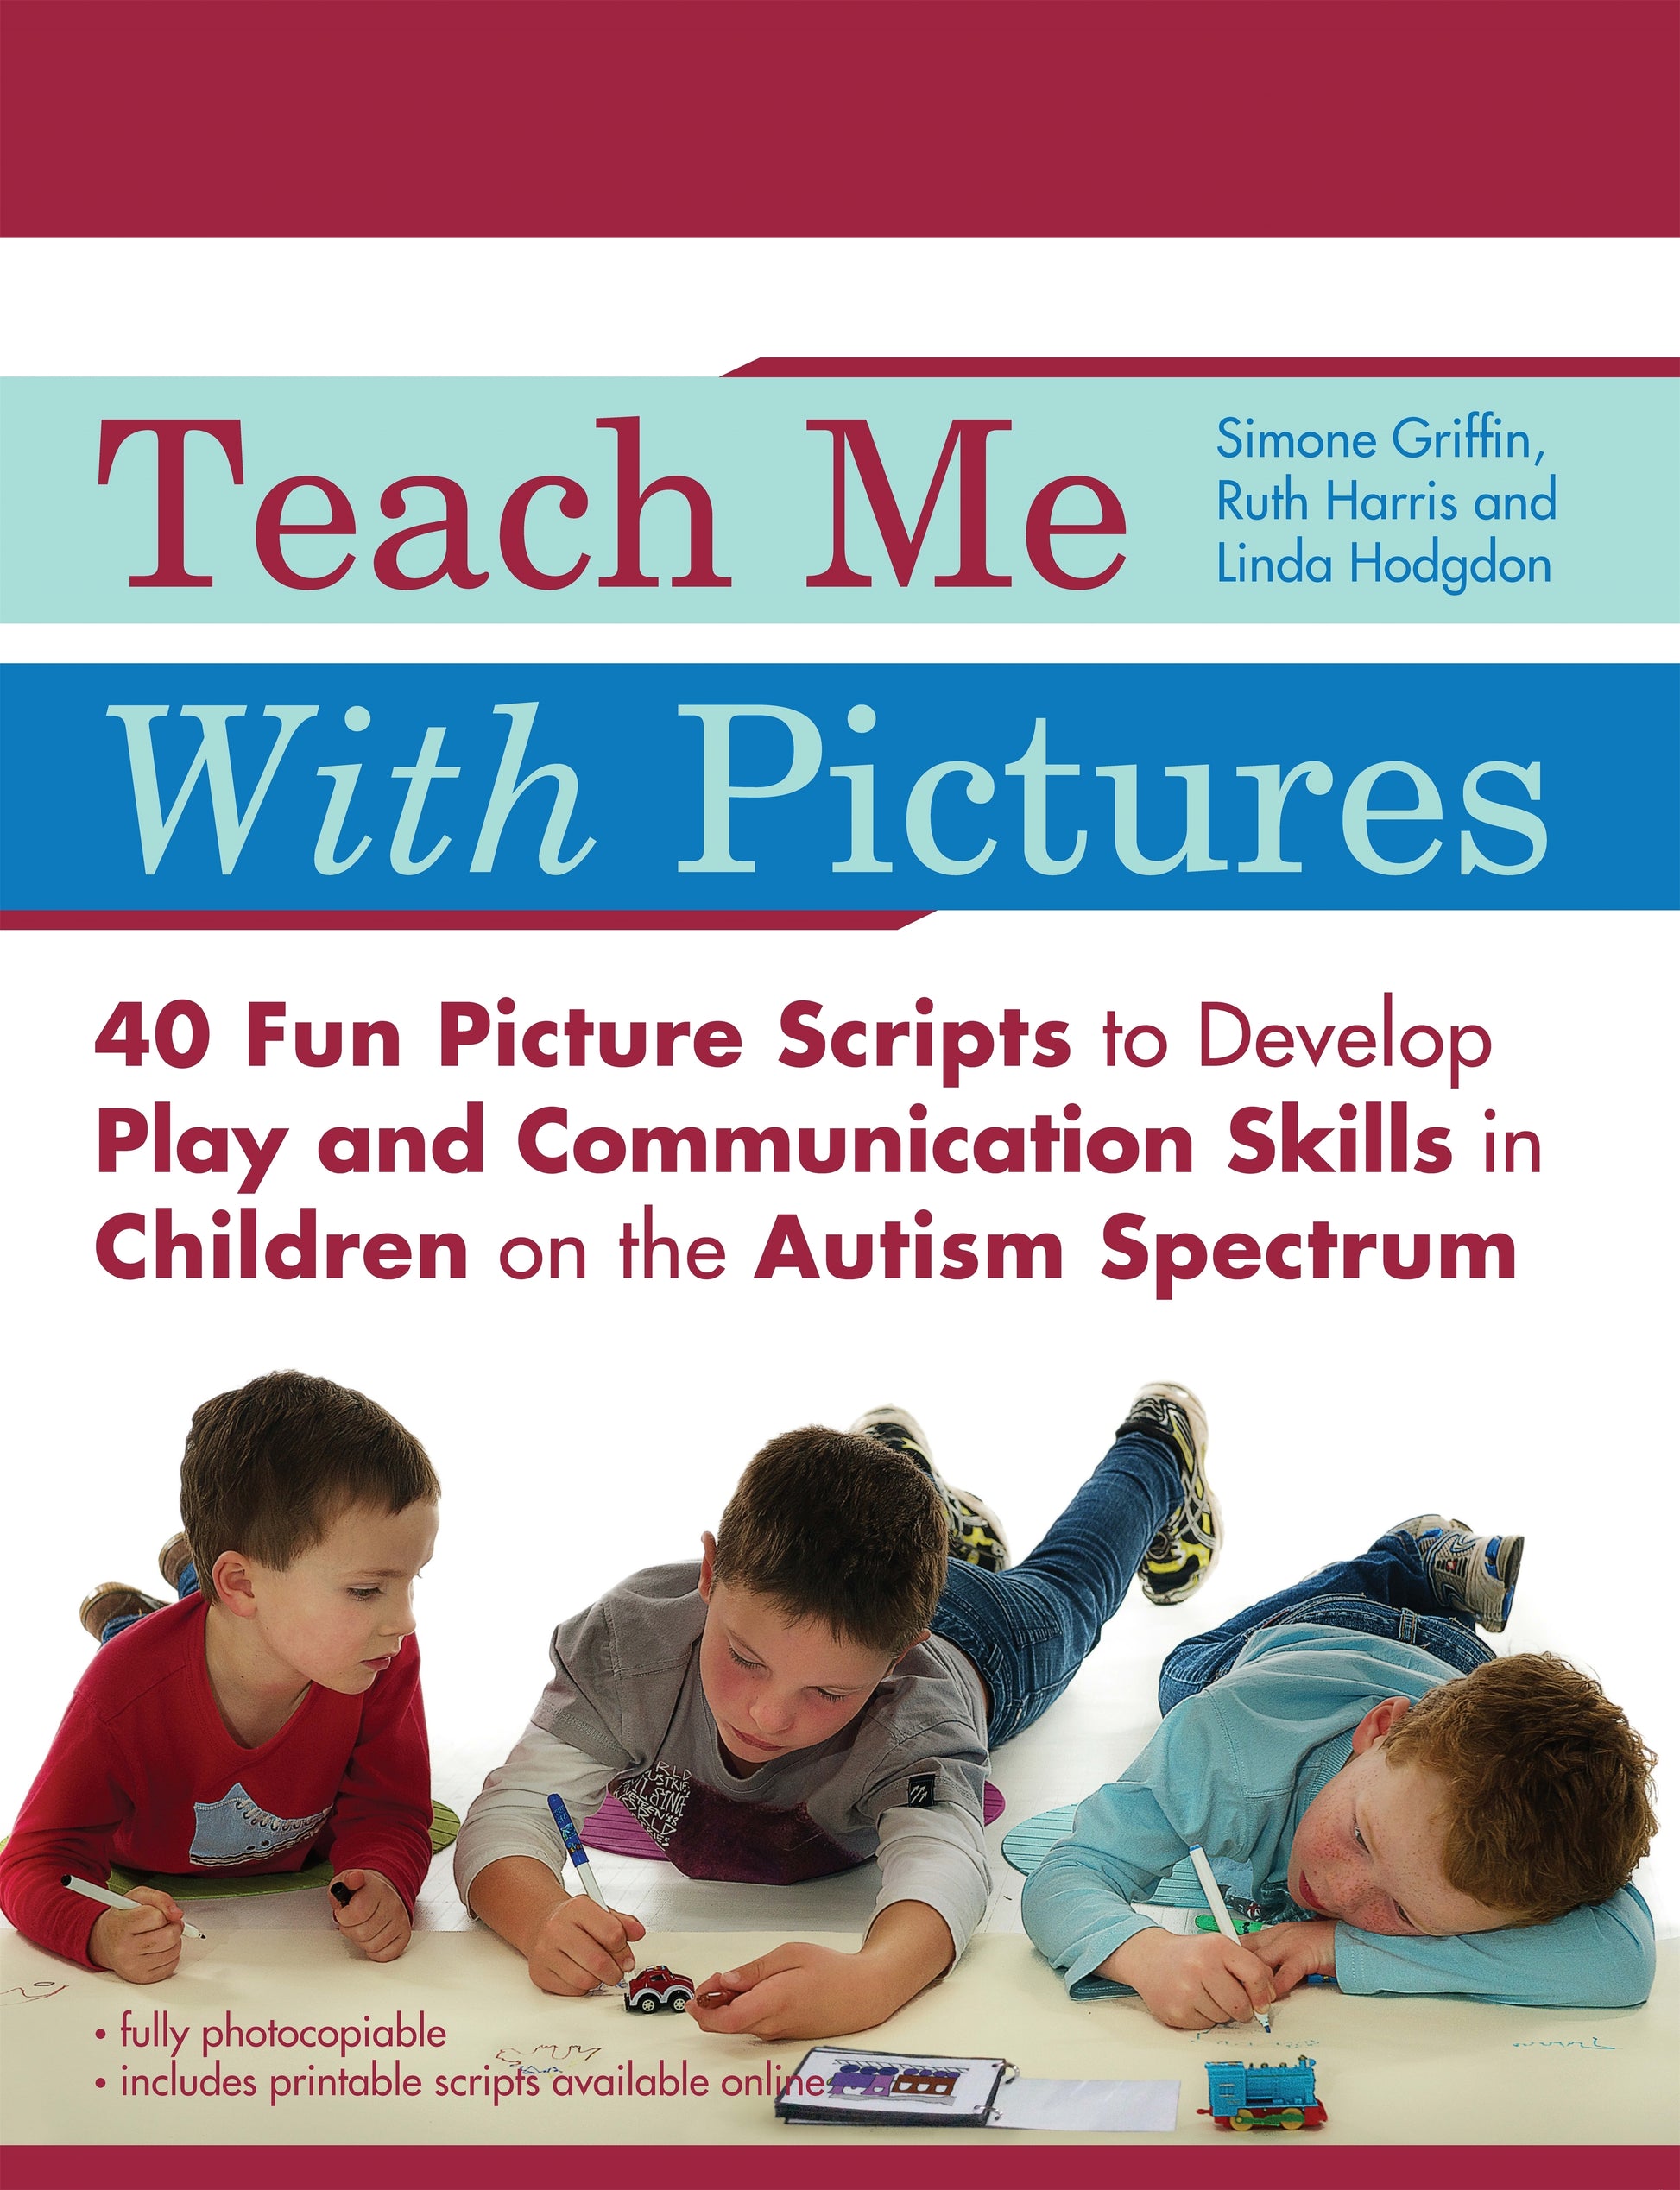 Teach Me With Pictures by Linda Hodgdon, Ruth Harris, Simone Griffin, Ralph Butler